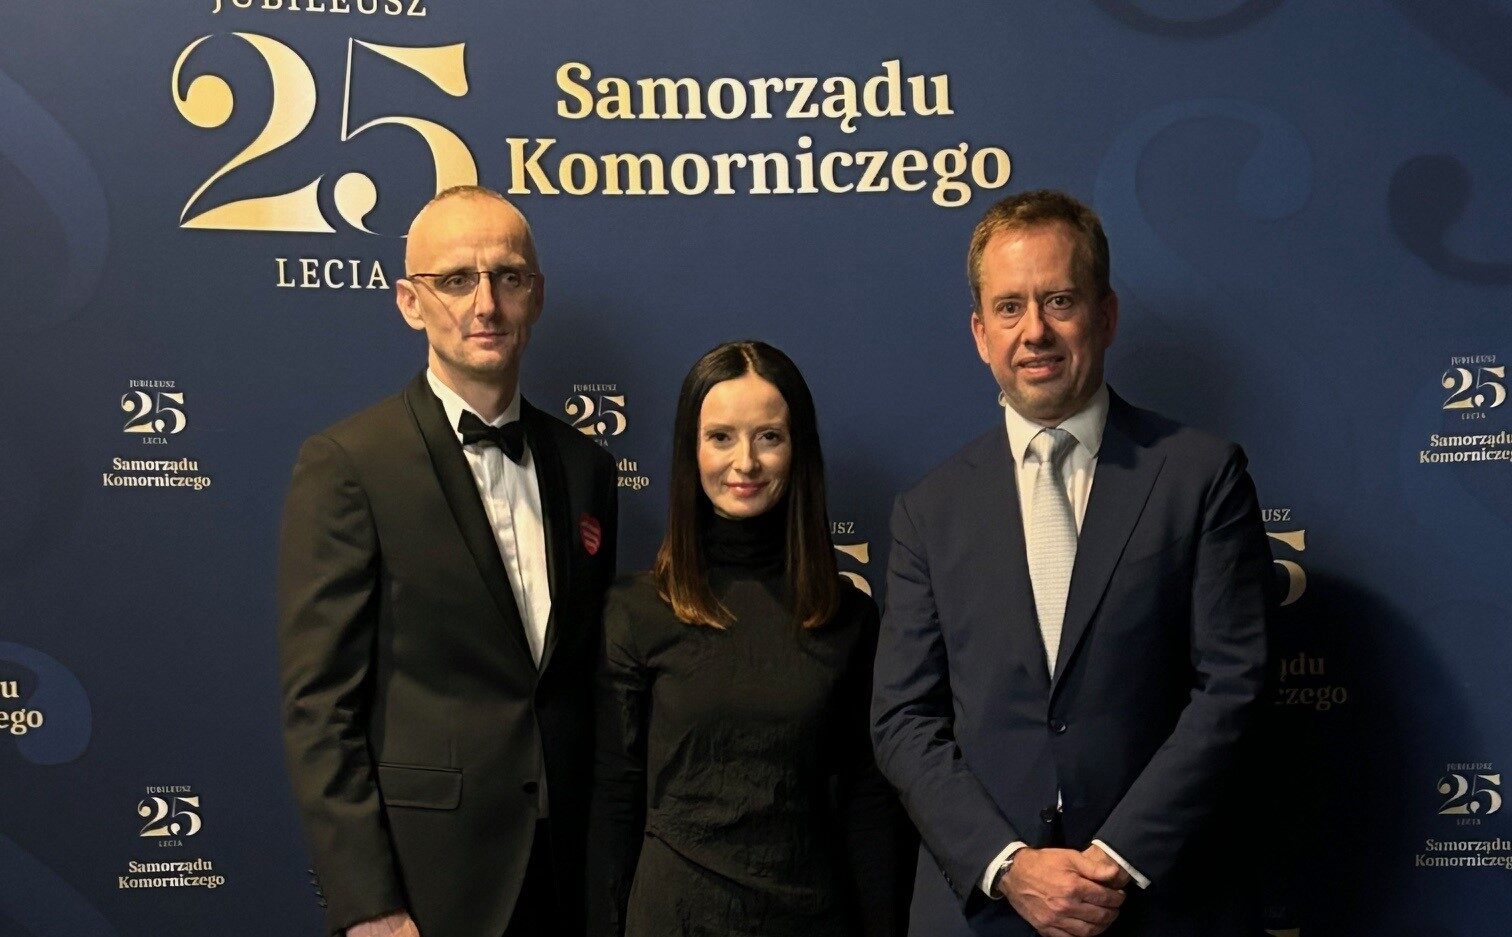 Celebration of the 25th anniversary of the National Council of Judicial Officers of Poland